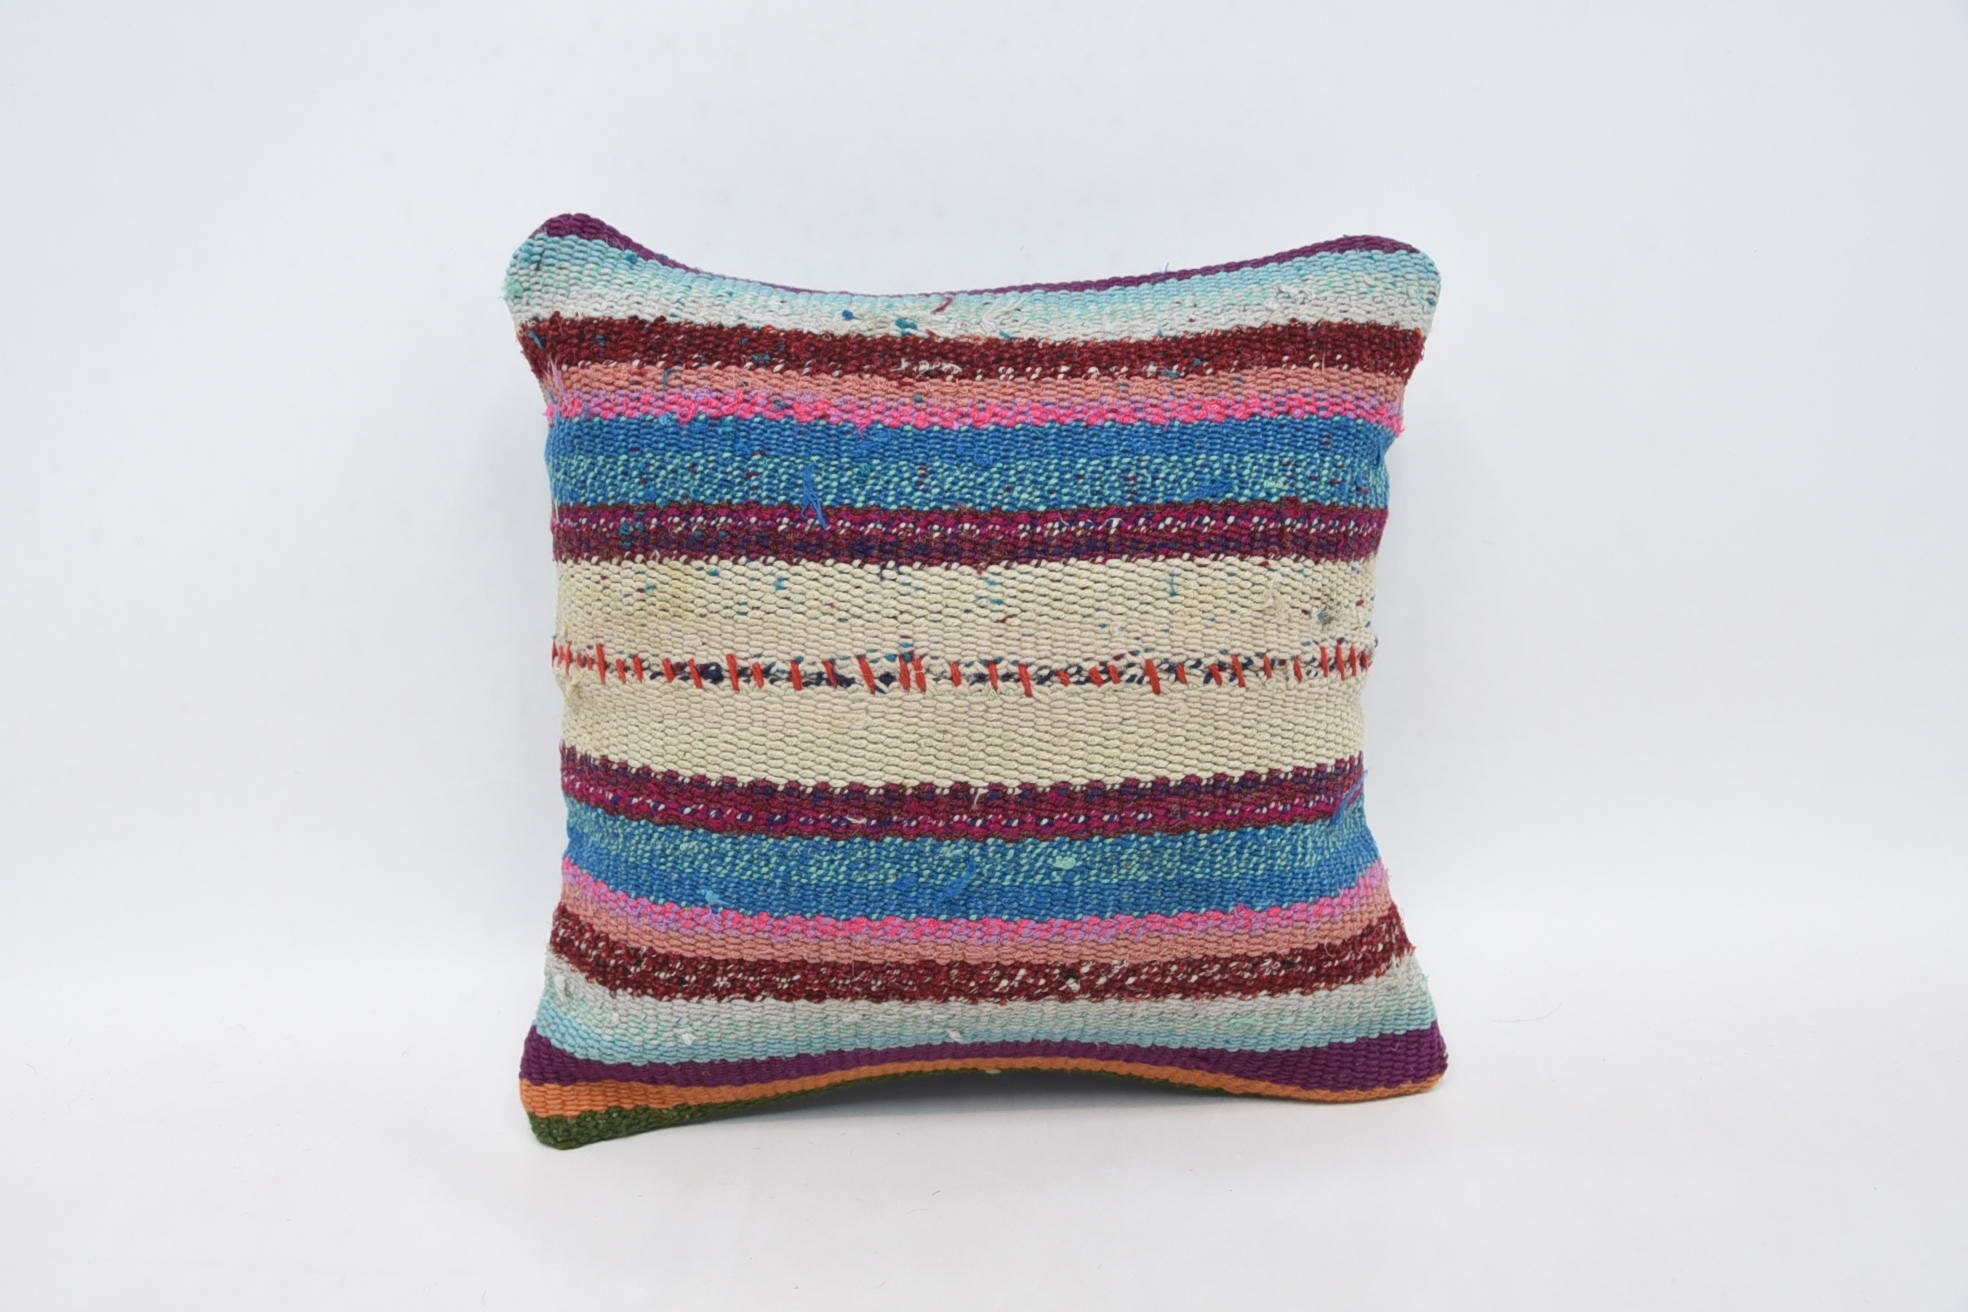 Pillow for Couch, Vintage Kilim Pillow, Antique Pillows, Customized Pillow, 12"x12" Blue Cushion Case, One Of A Kind Cushion Cover